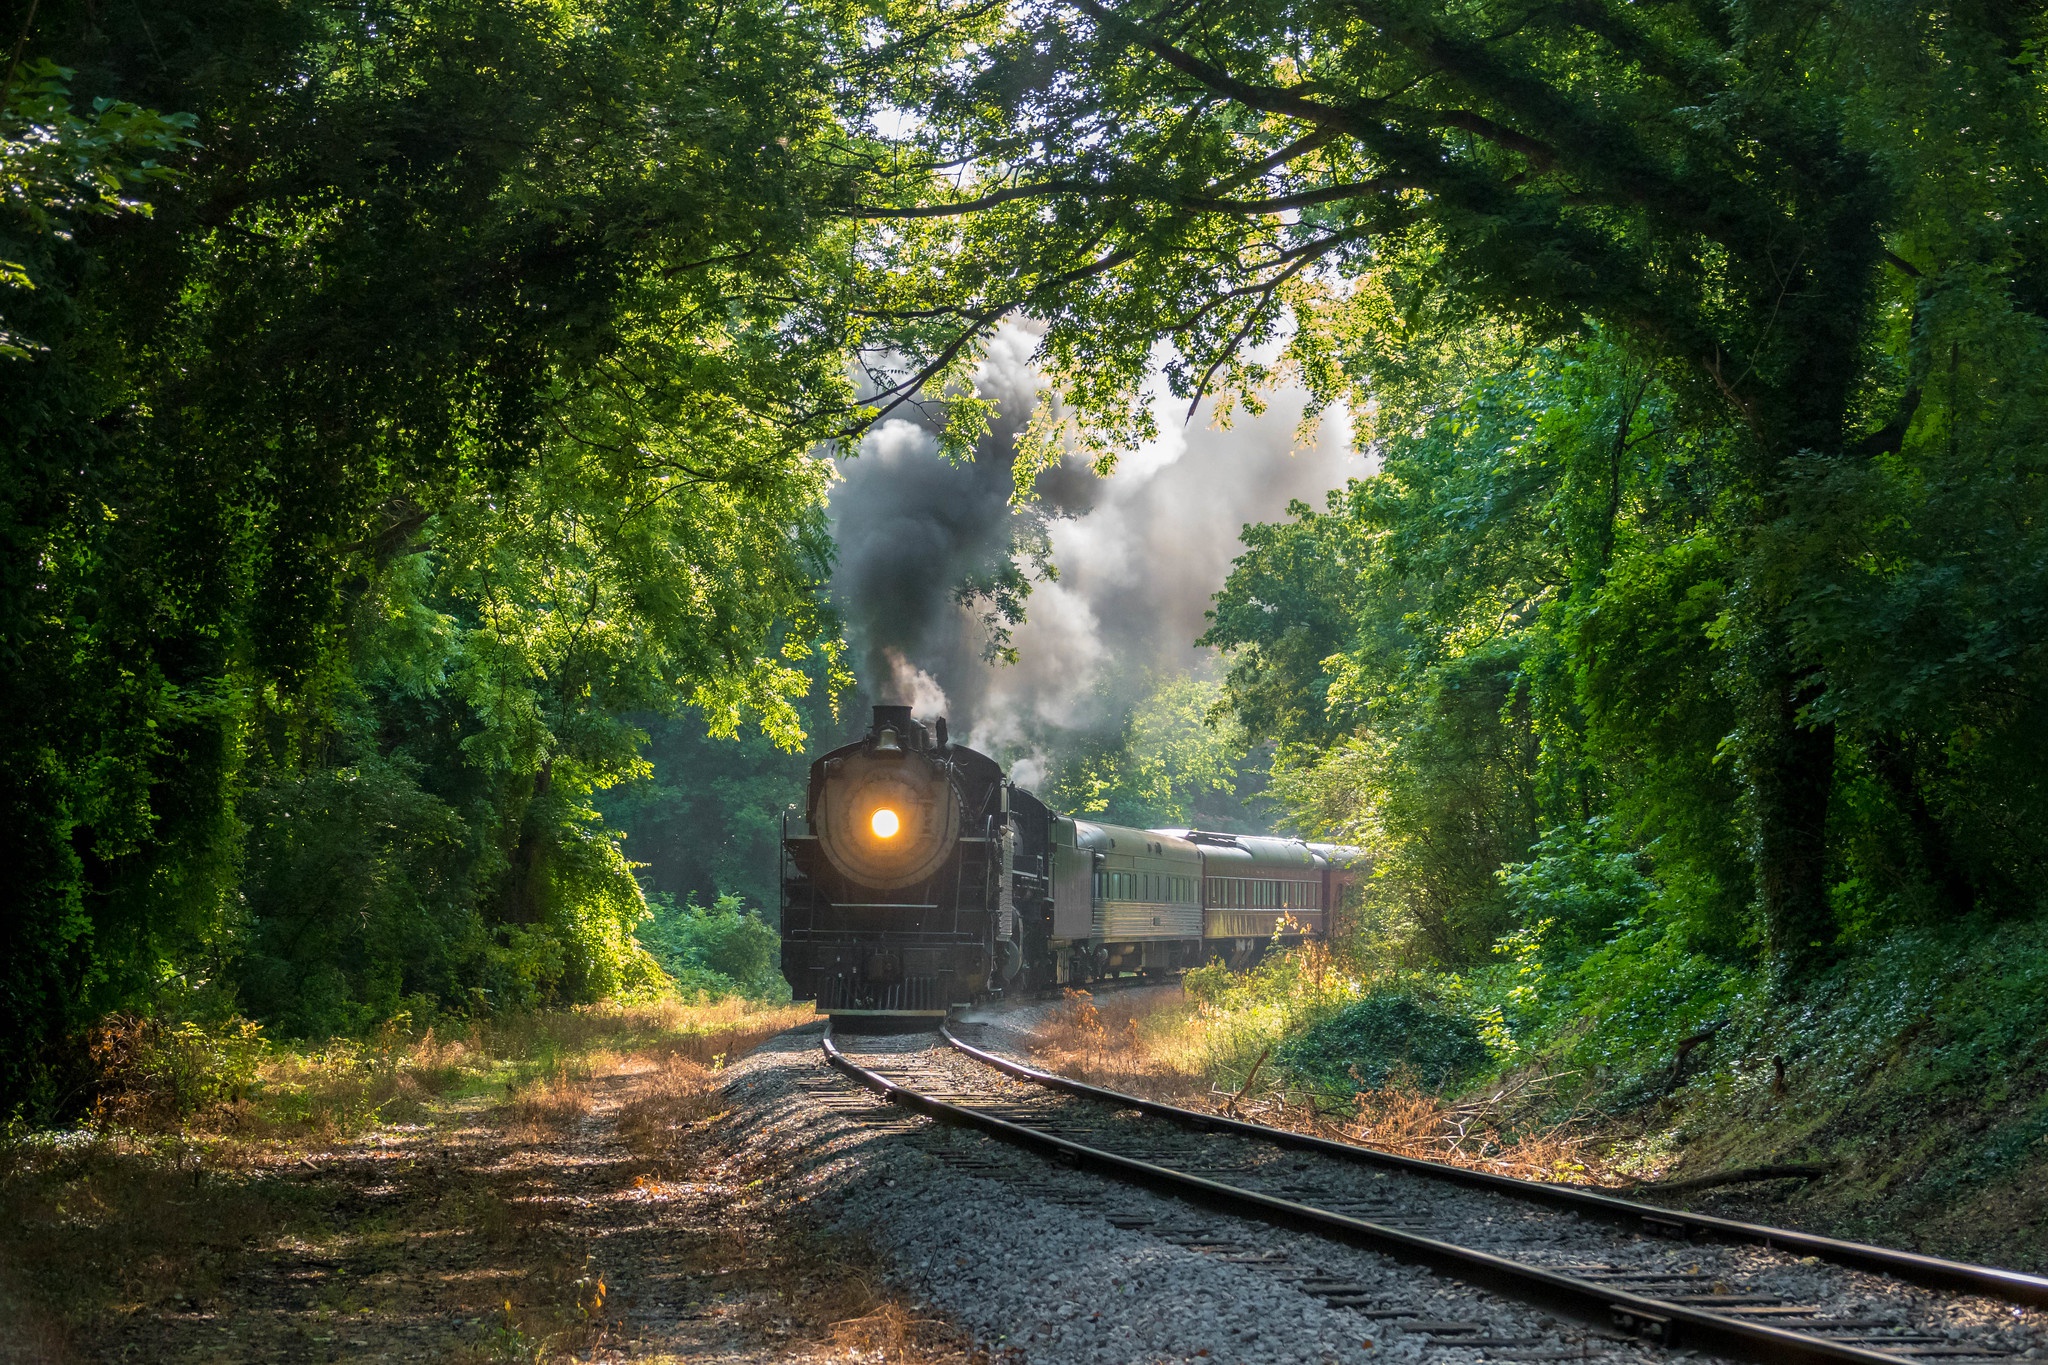 General 2048x1365 Tennessee vehicle train railway outdoors nature forest